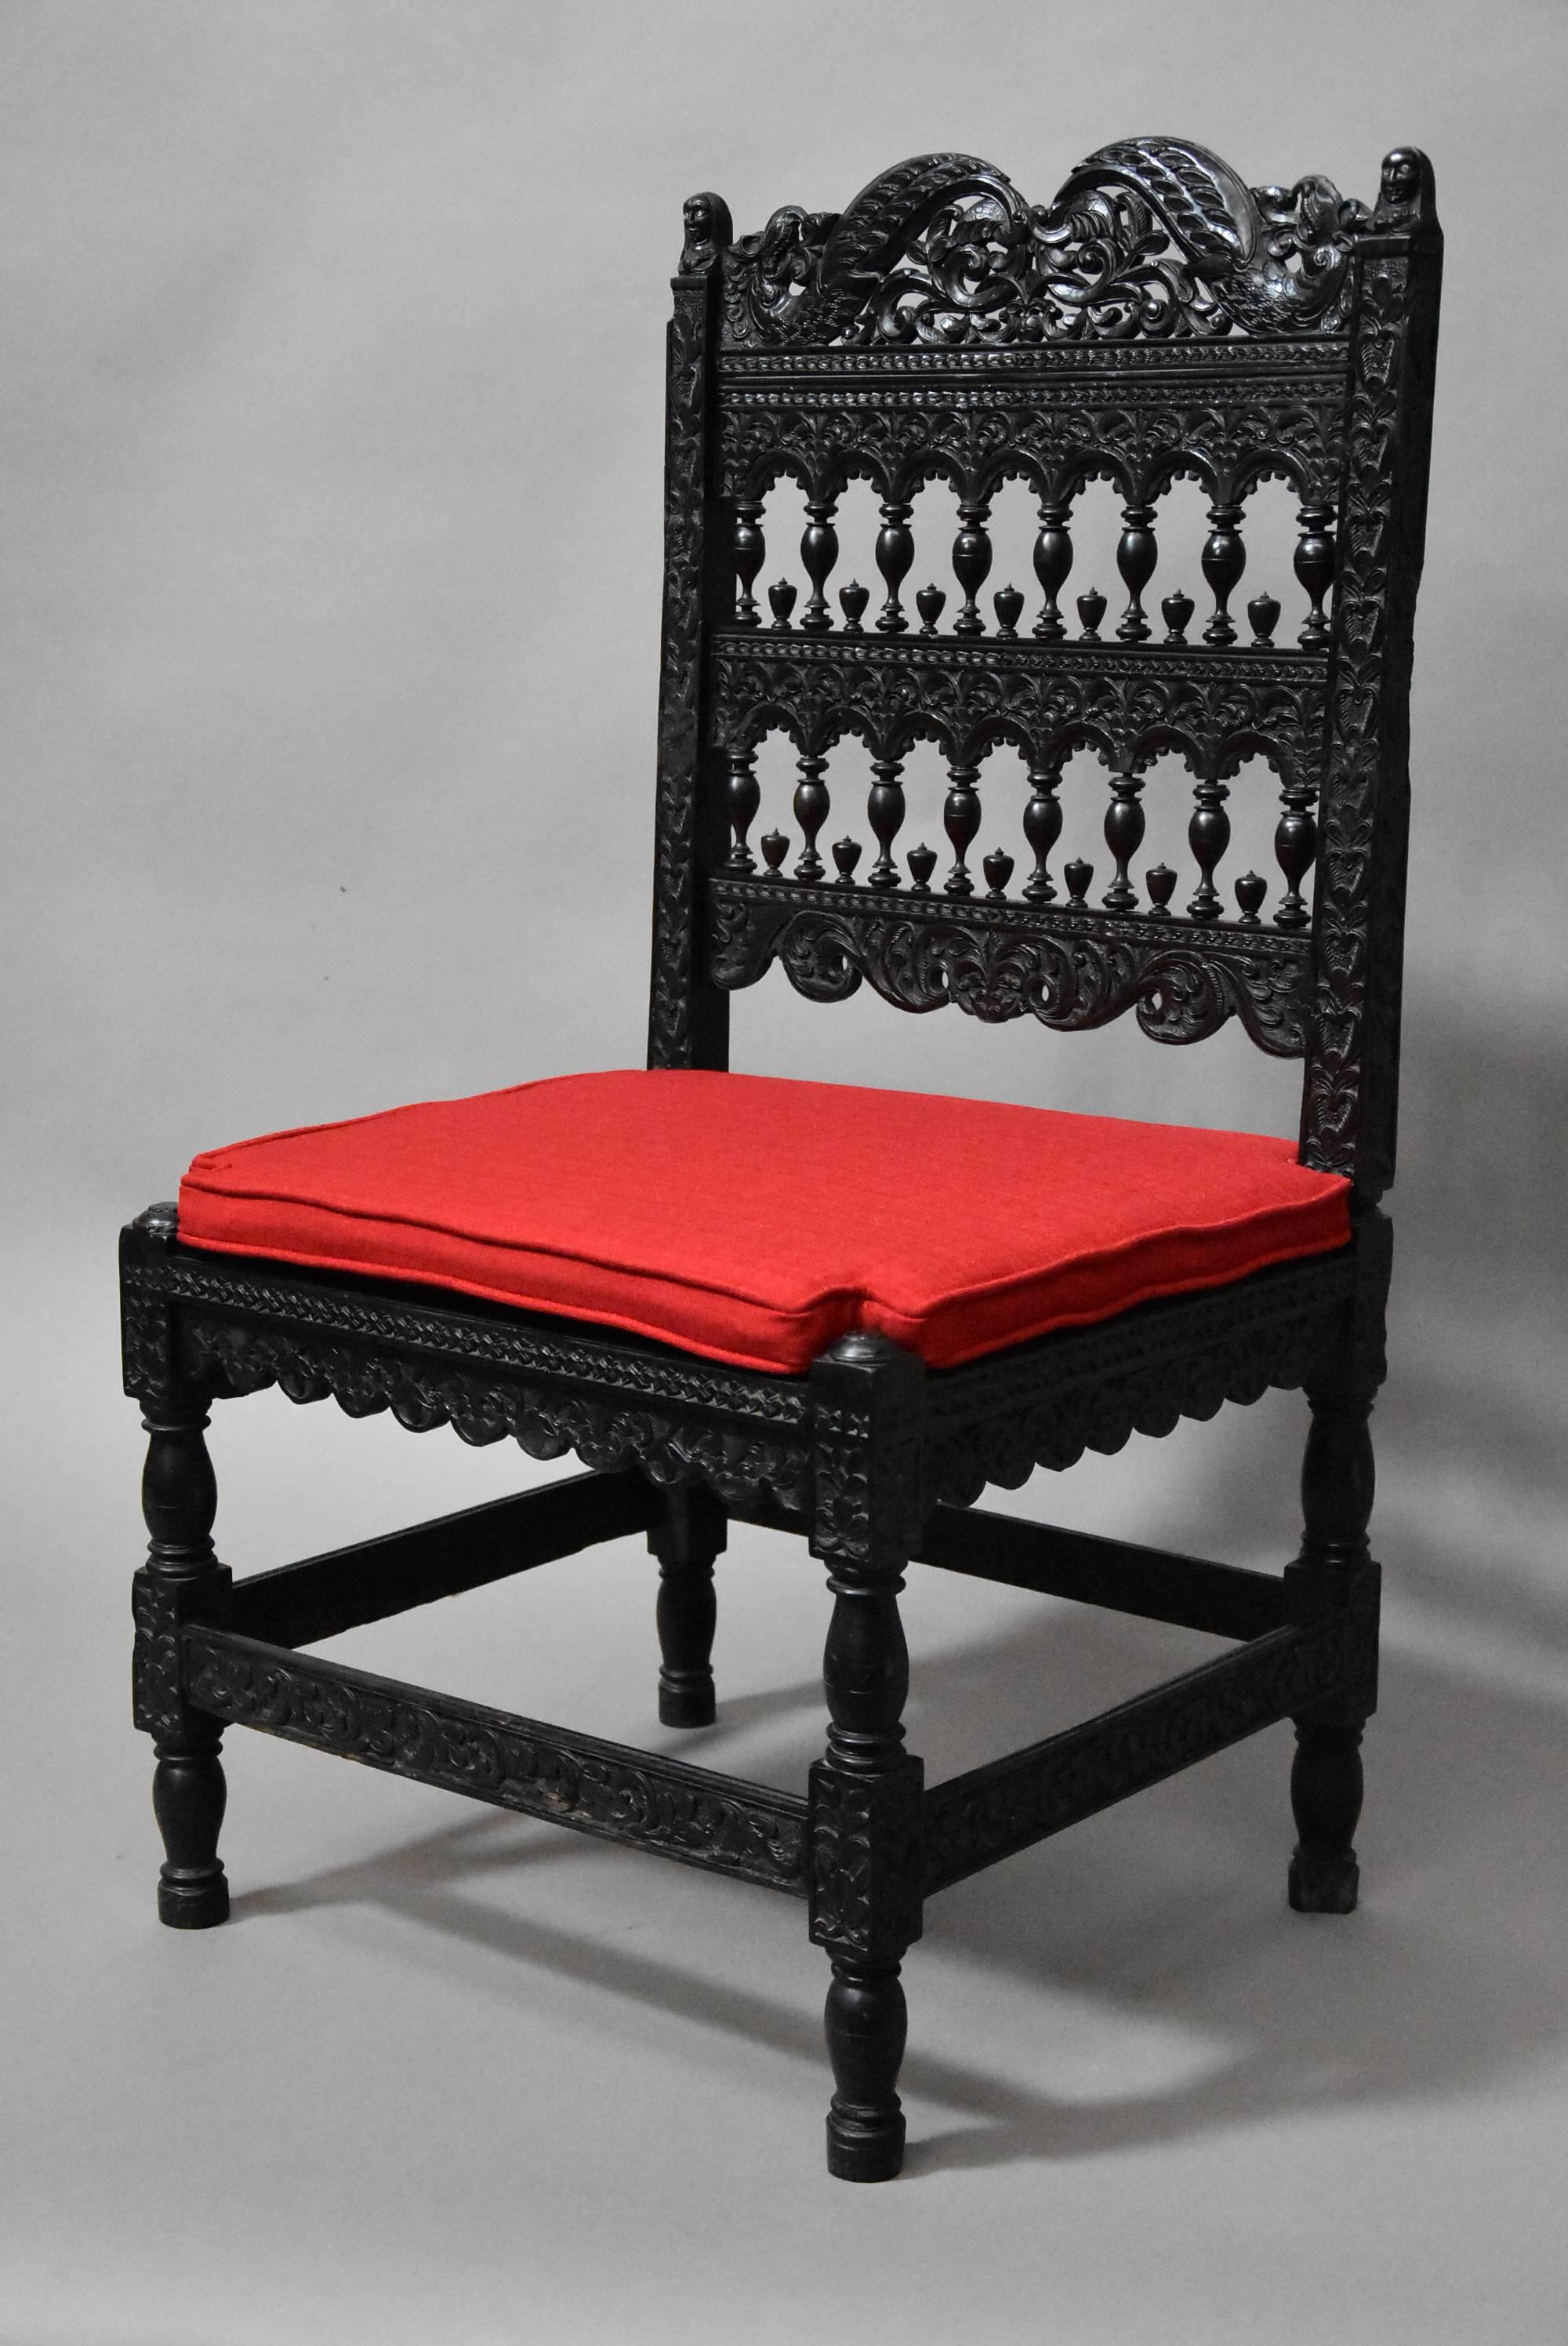 A superb quality late 17th century solid ebony chair with intricate carving from The Coromandel Coast, India.

This chair consists of a profusely carved back rail of scrolling foliate decoration with carved mythical beasts to either side.

This